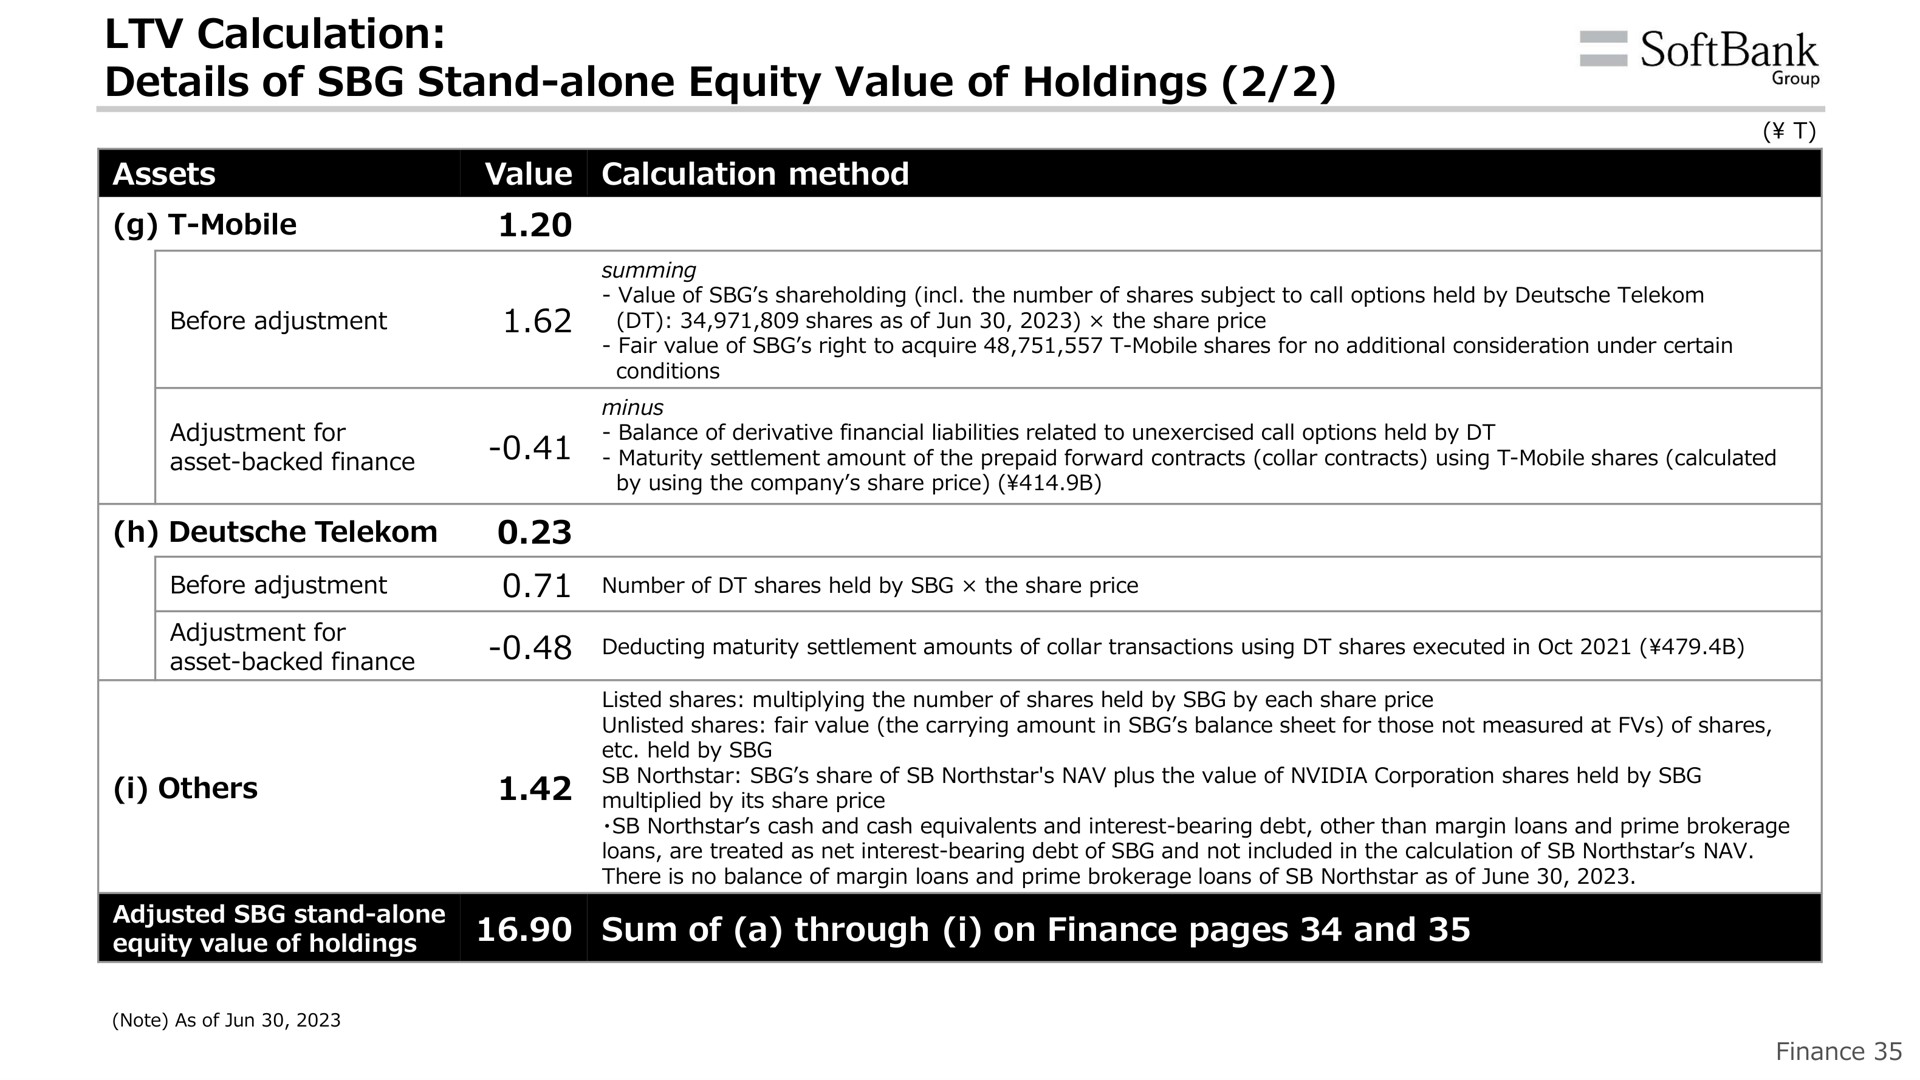 calculation details of stand alone equity value of holdings | SoftBank